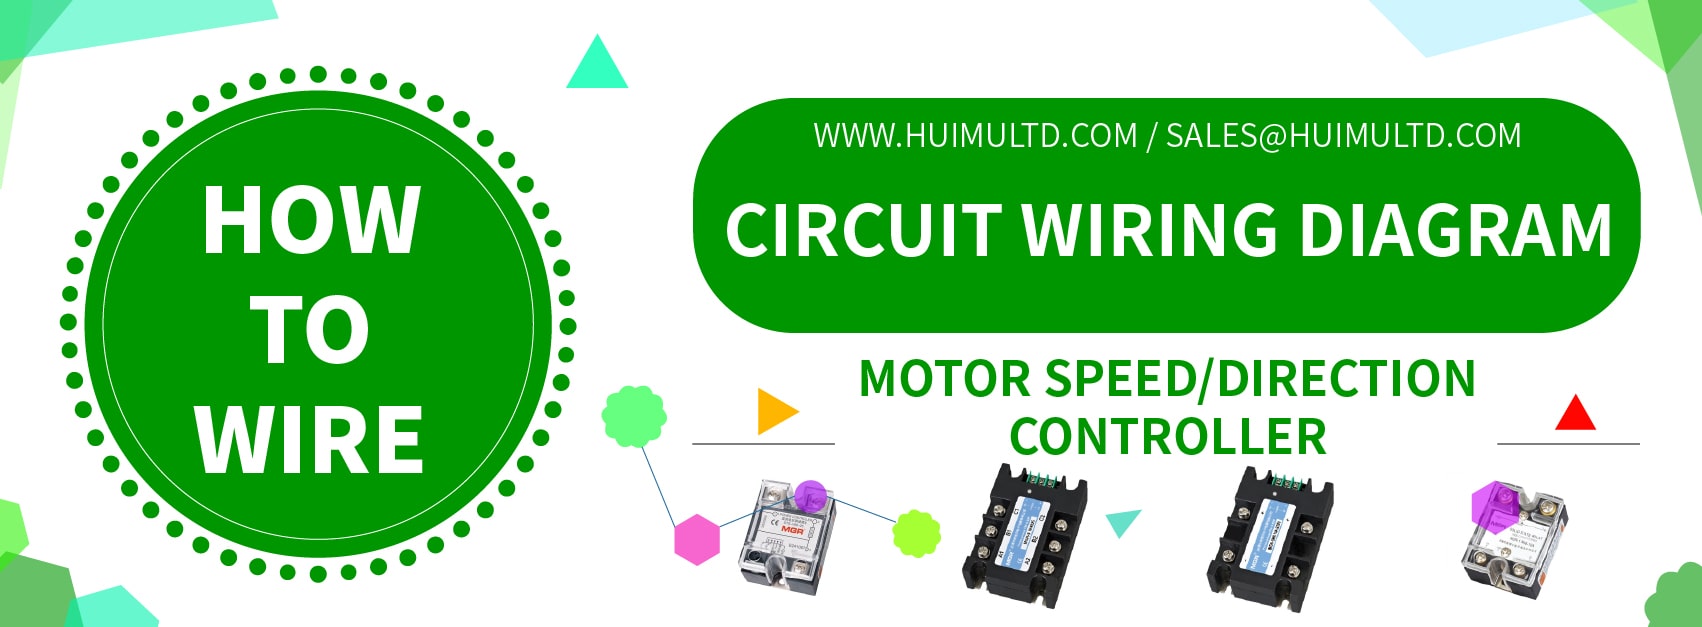 How to wire the motor speed or direction controller? banner